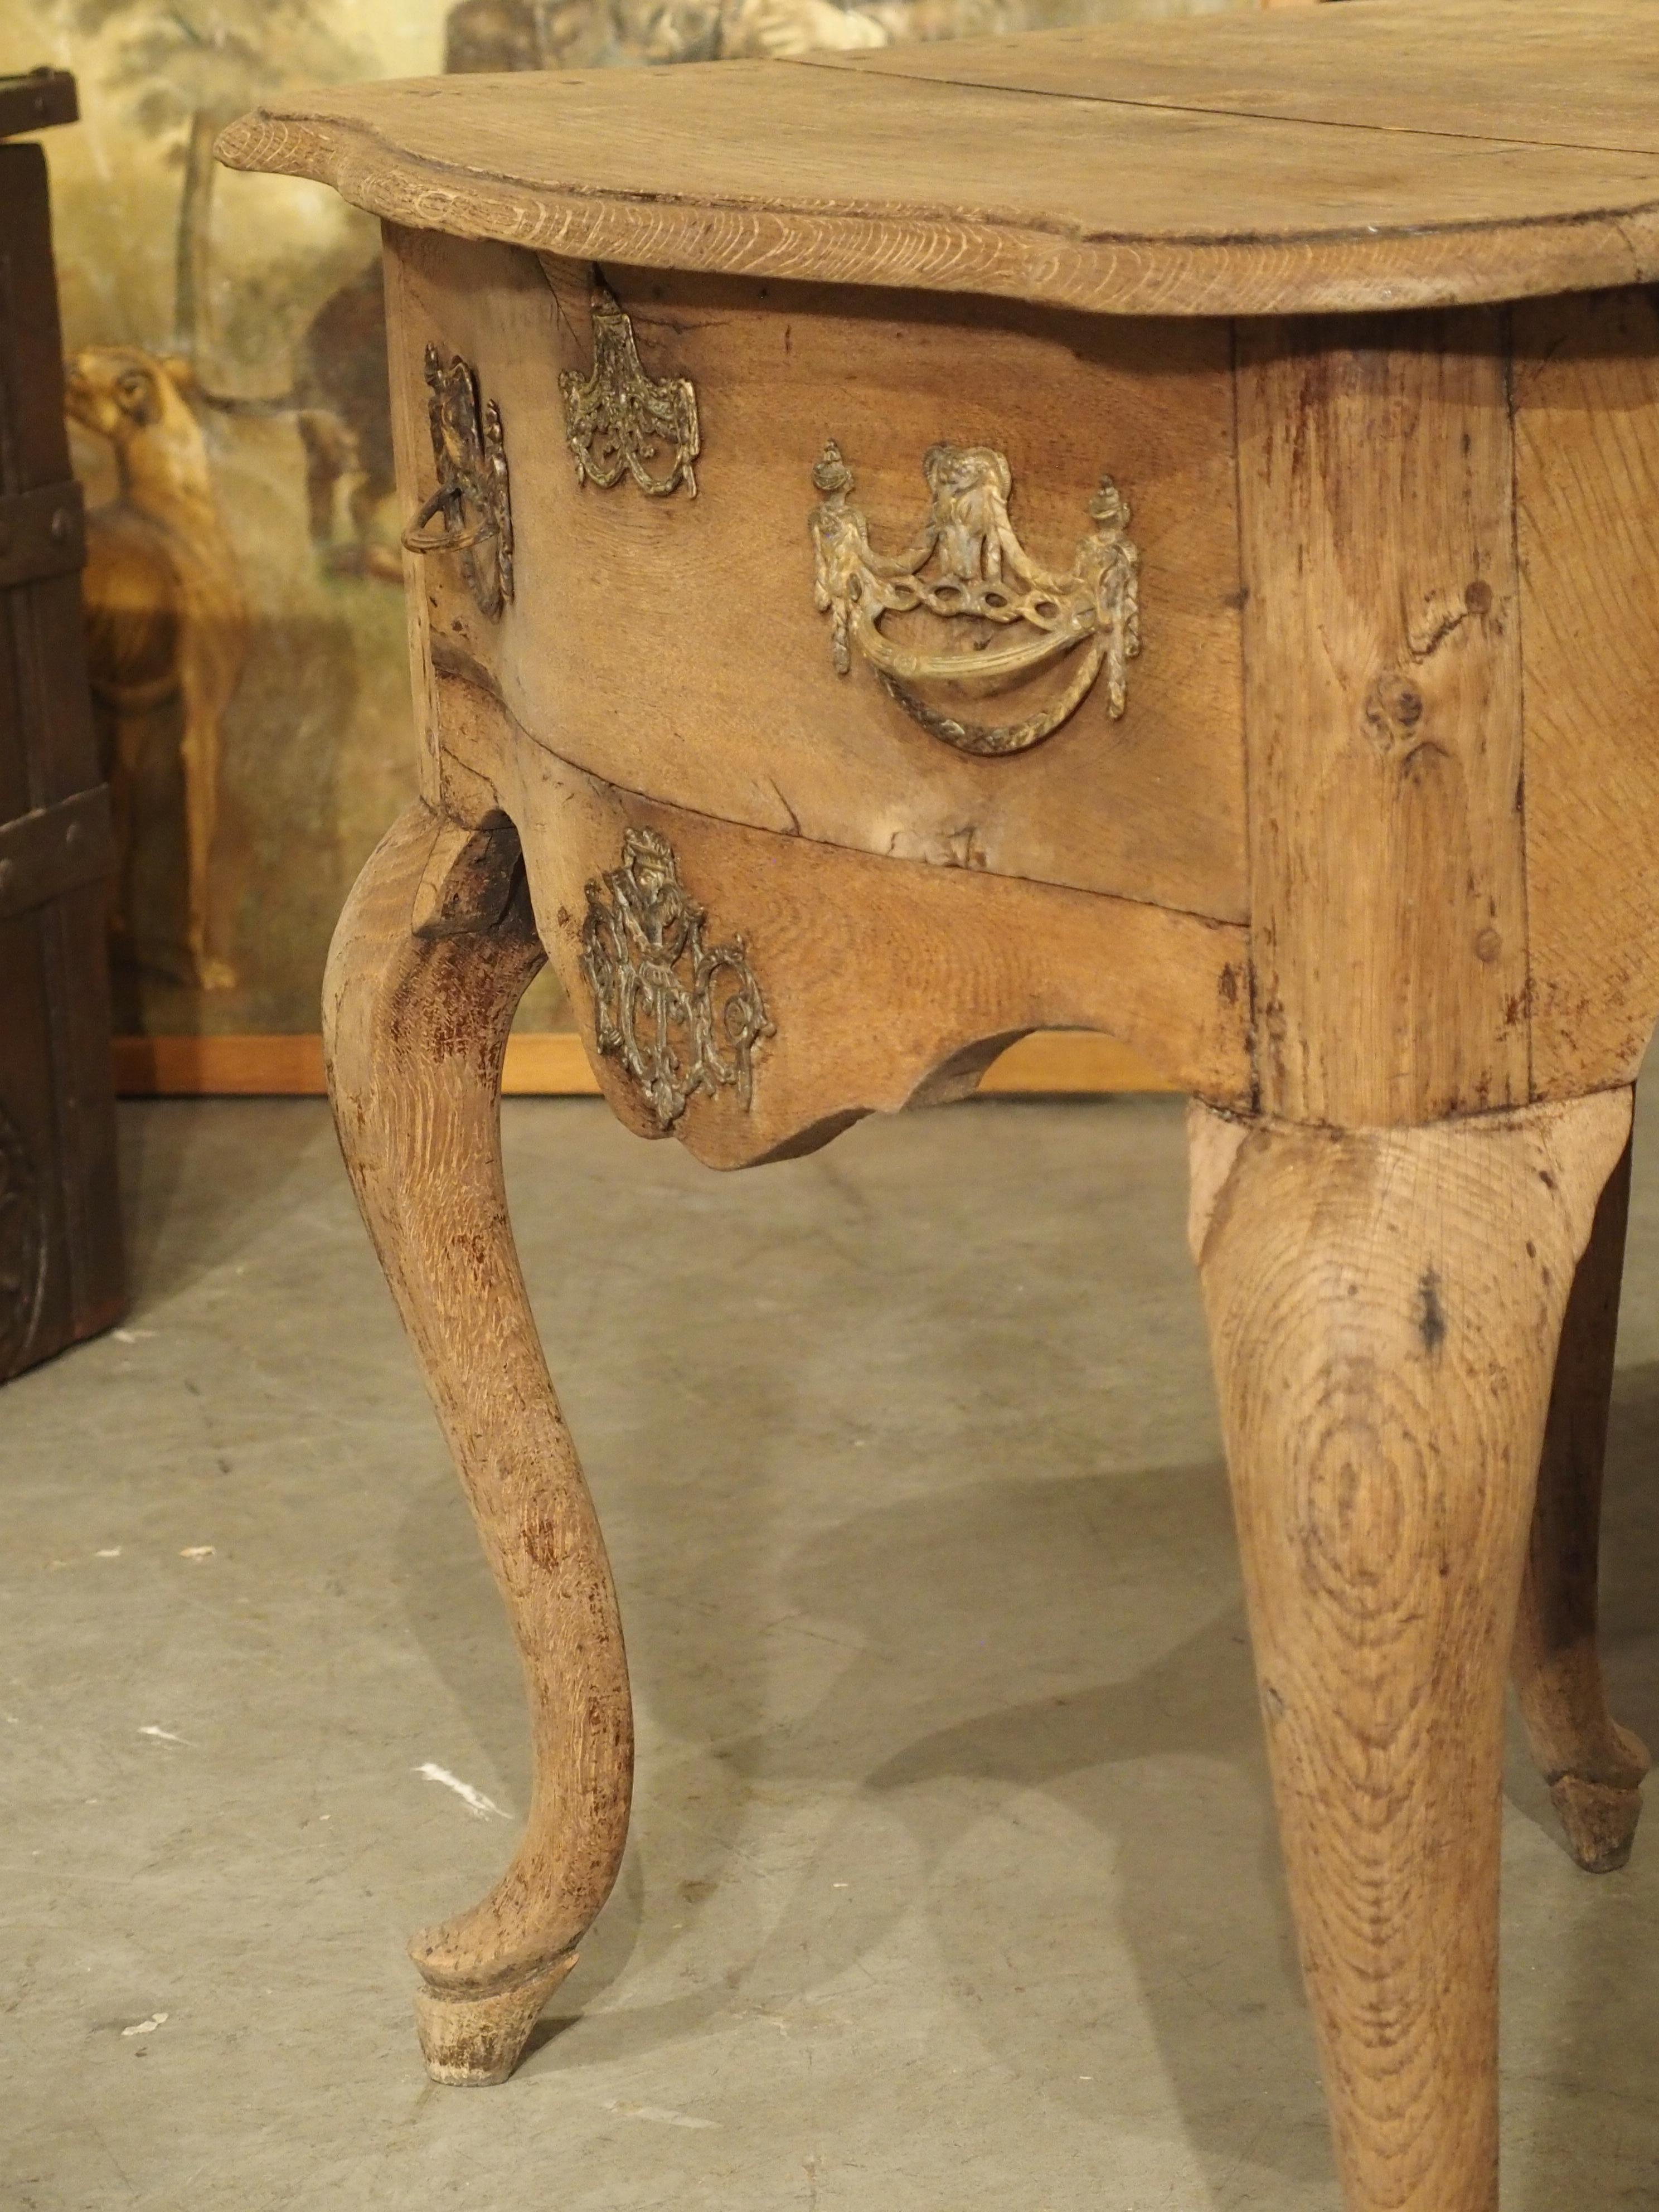 This charming oak console table was hand carved in the Netherlands during the 1700’s. The shaped top has quarter round molding that hangs over the table base.

The front of the console has a drawer adorned with two brass pulls and an escutcheon.